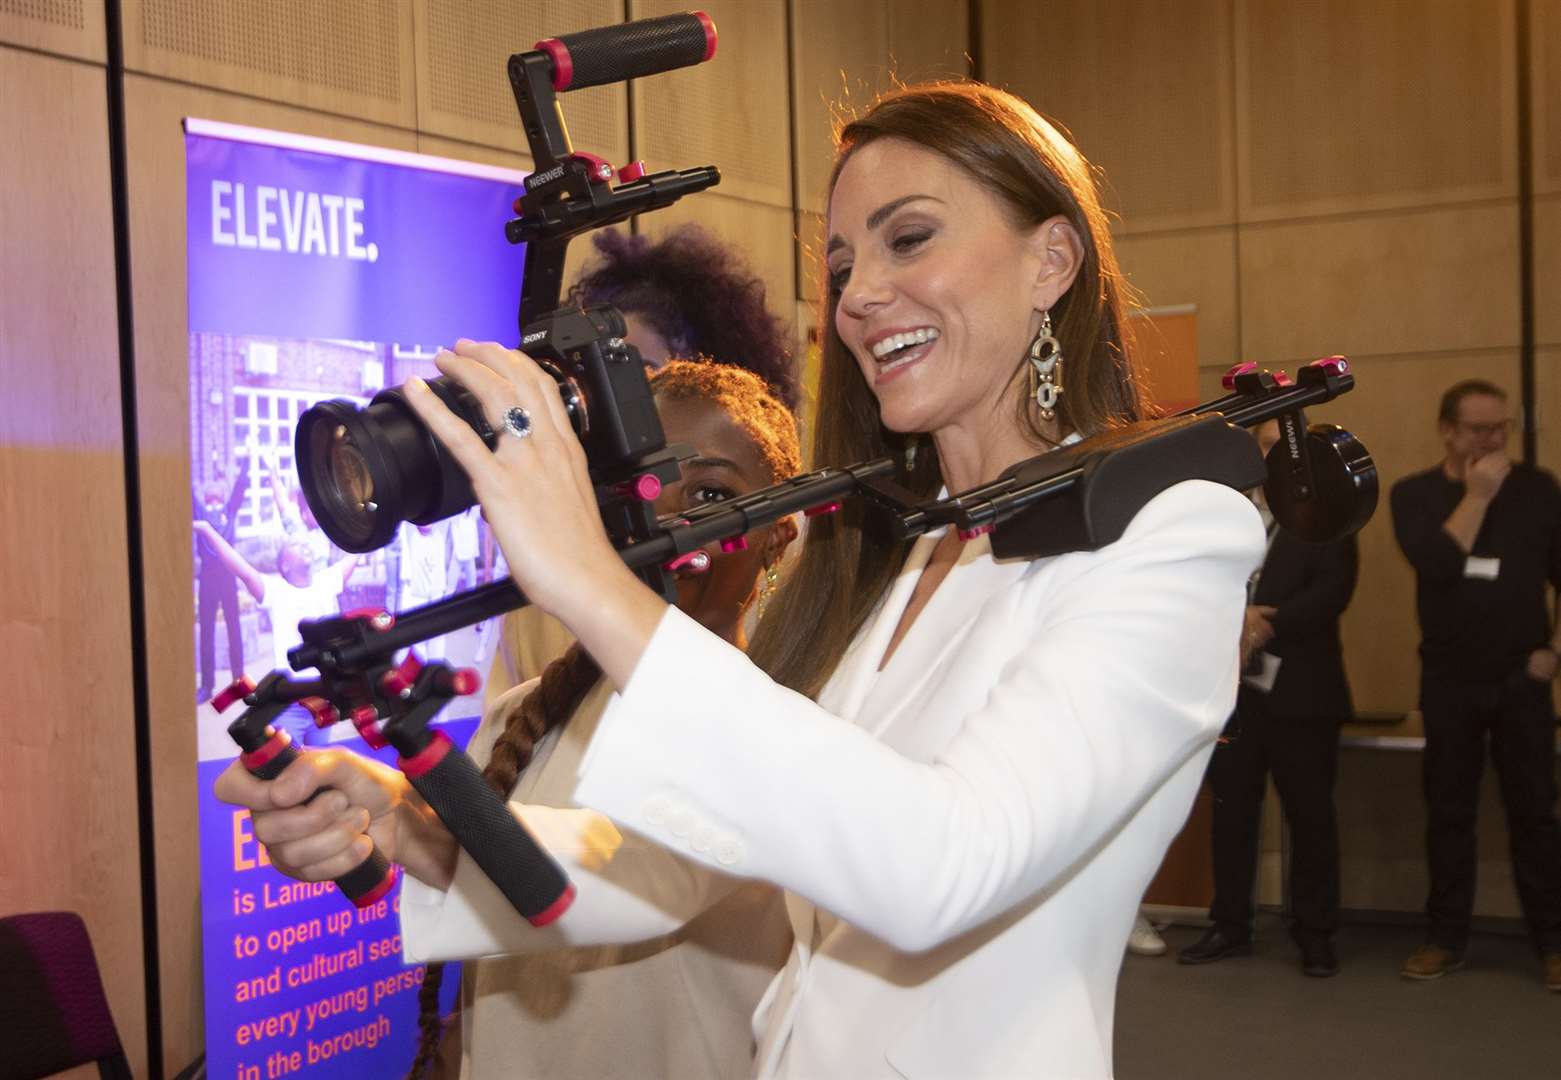 The Duchess of Cambridge is a keen amateur photographer (Eddie Mulholland/Daily Telegraph/PA)